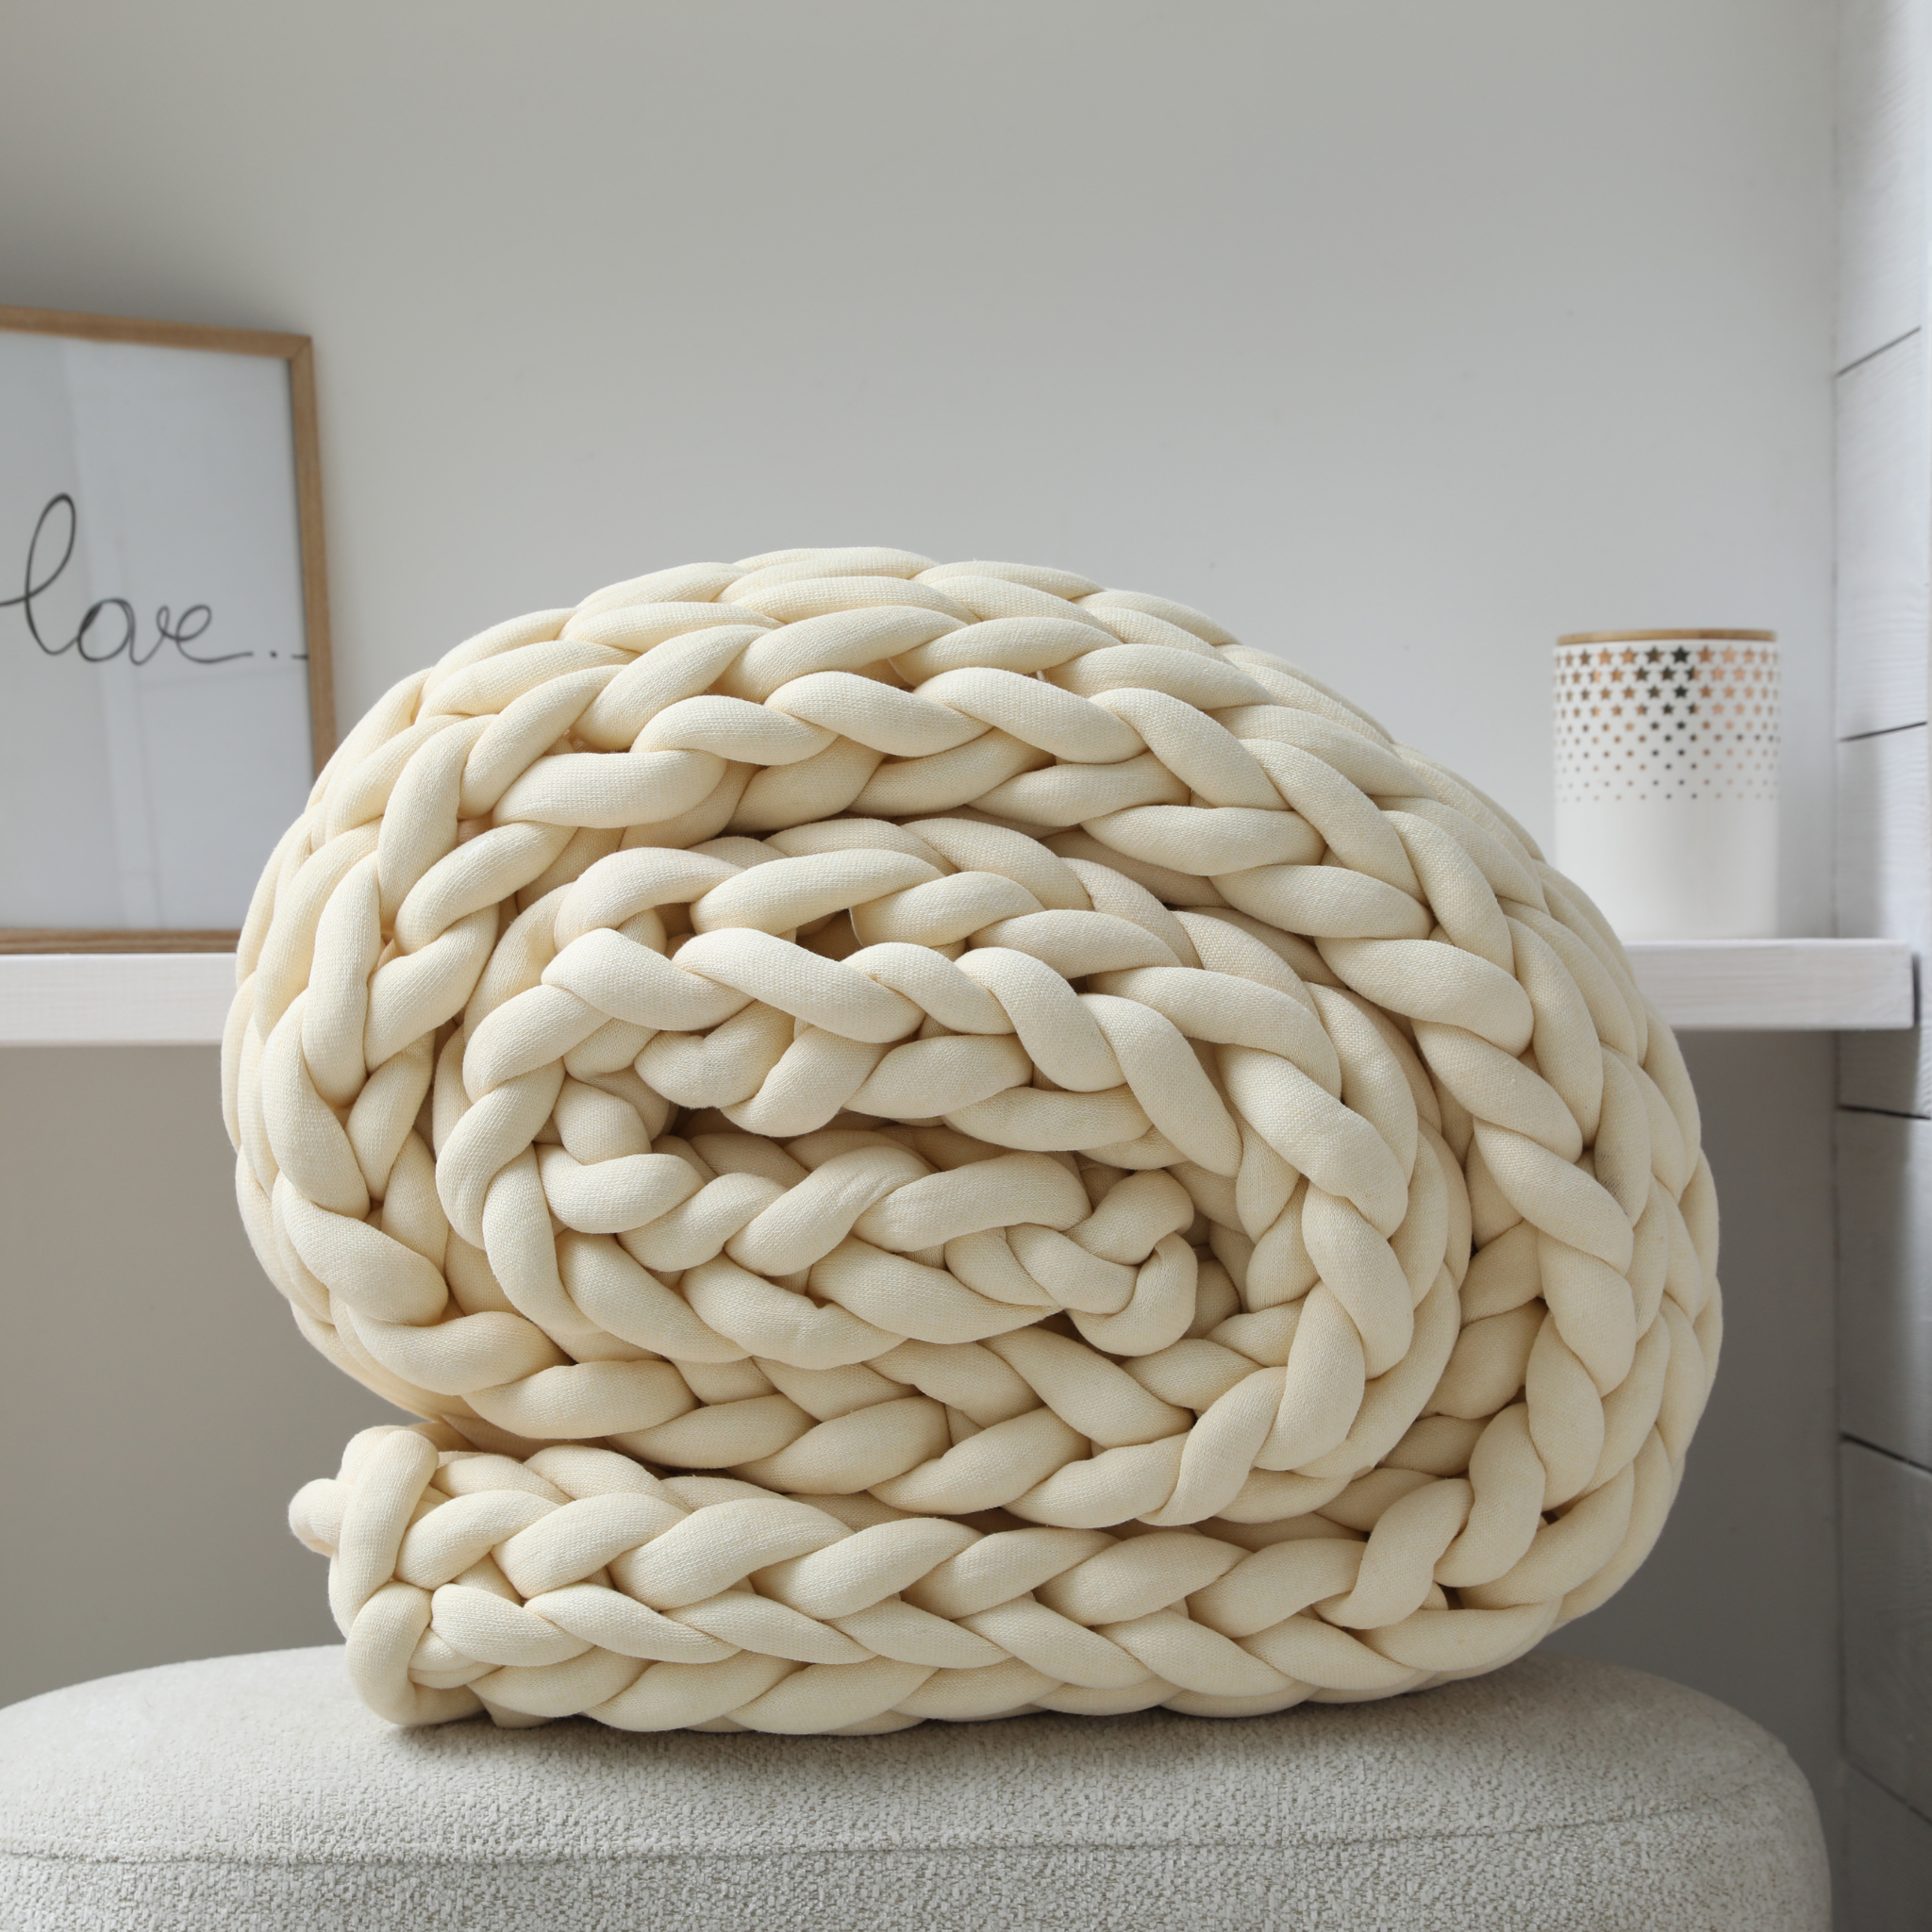 Rolled Up Chunky Blanket in Off White for Fragrance Ad Front View with White Decor in Back